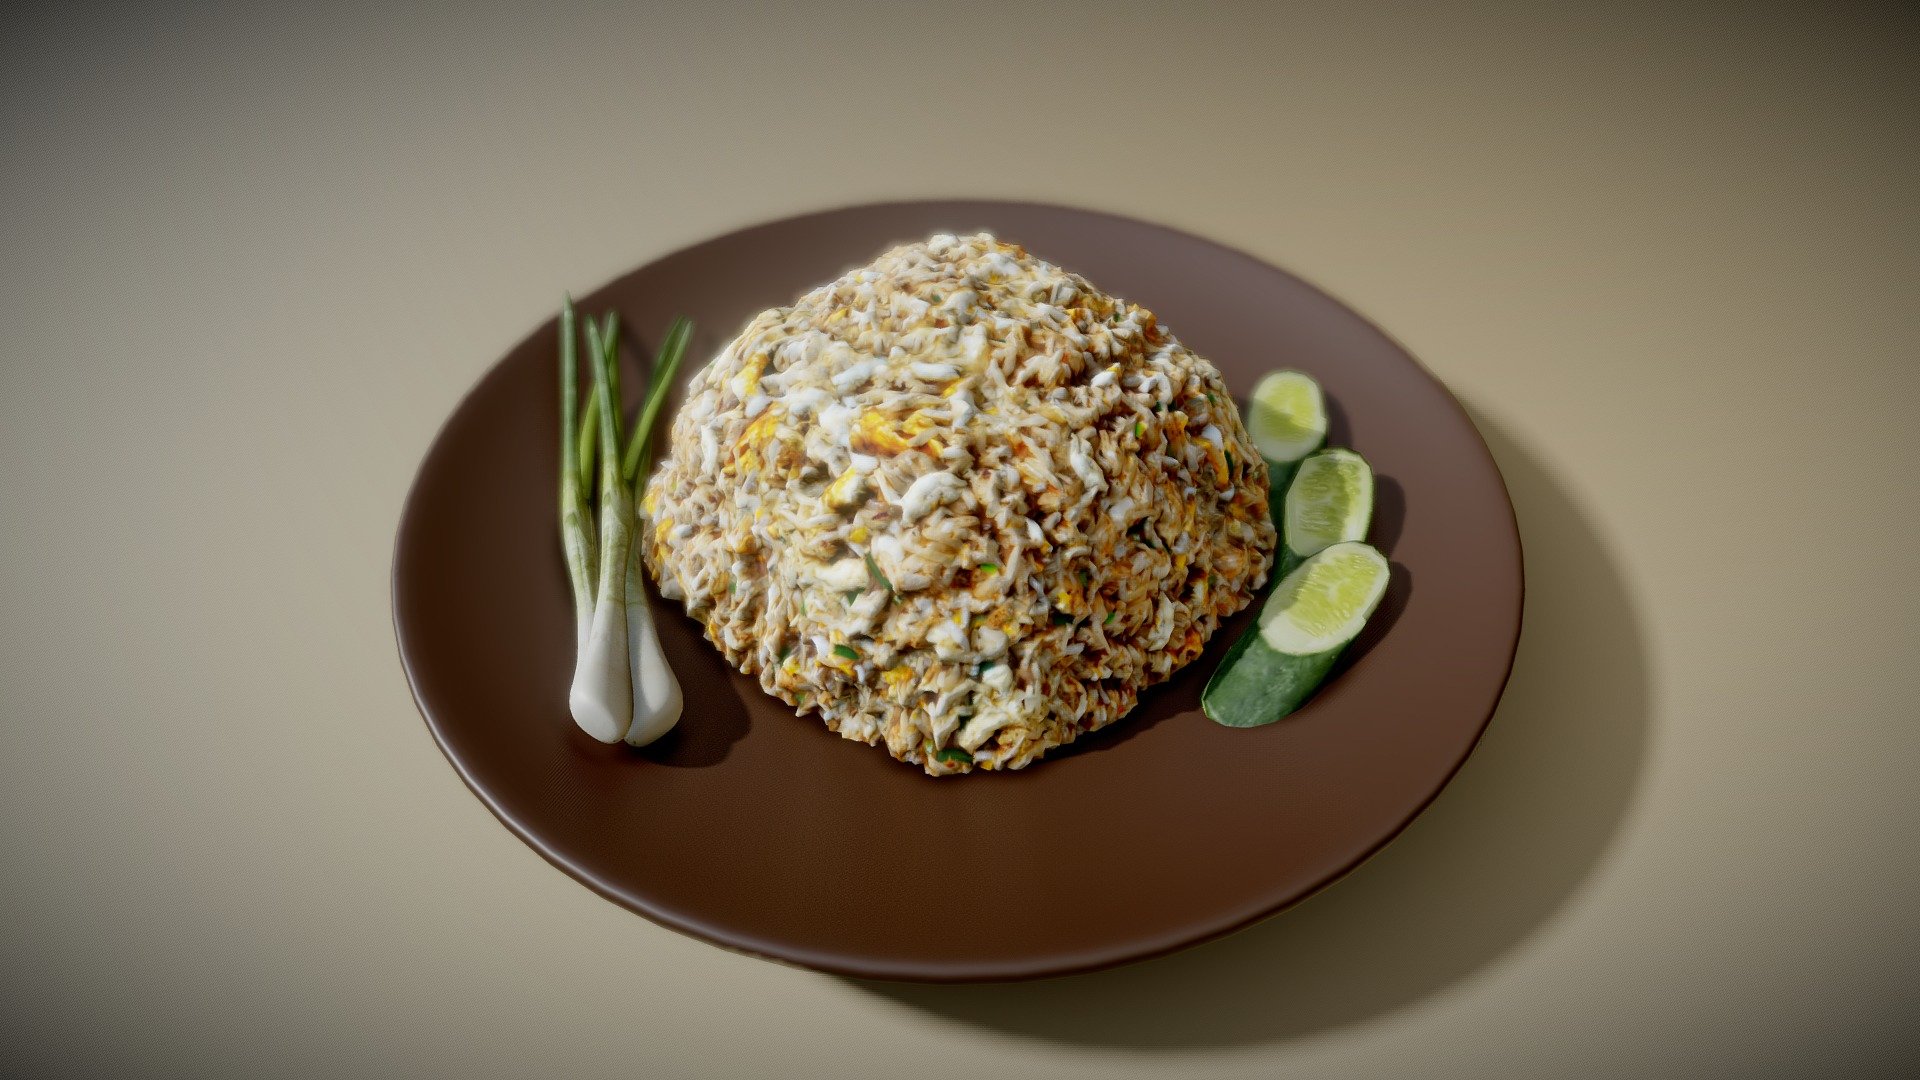 Another plate of Asian food. This time it's a well-known fried rice.
Also available in BlenderKit 3d model